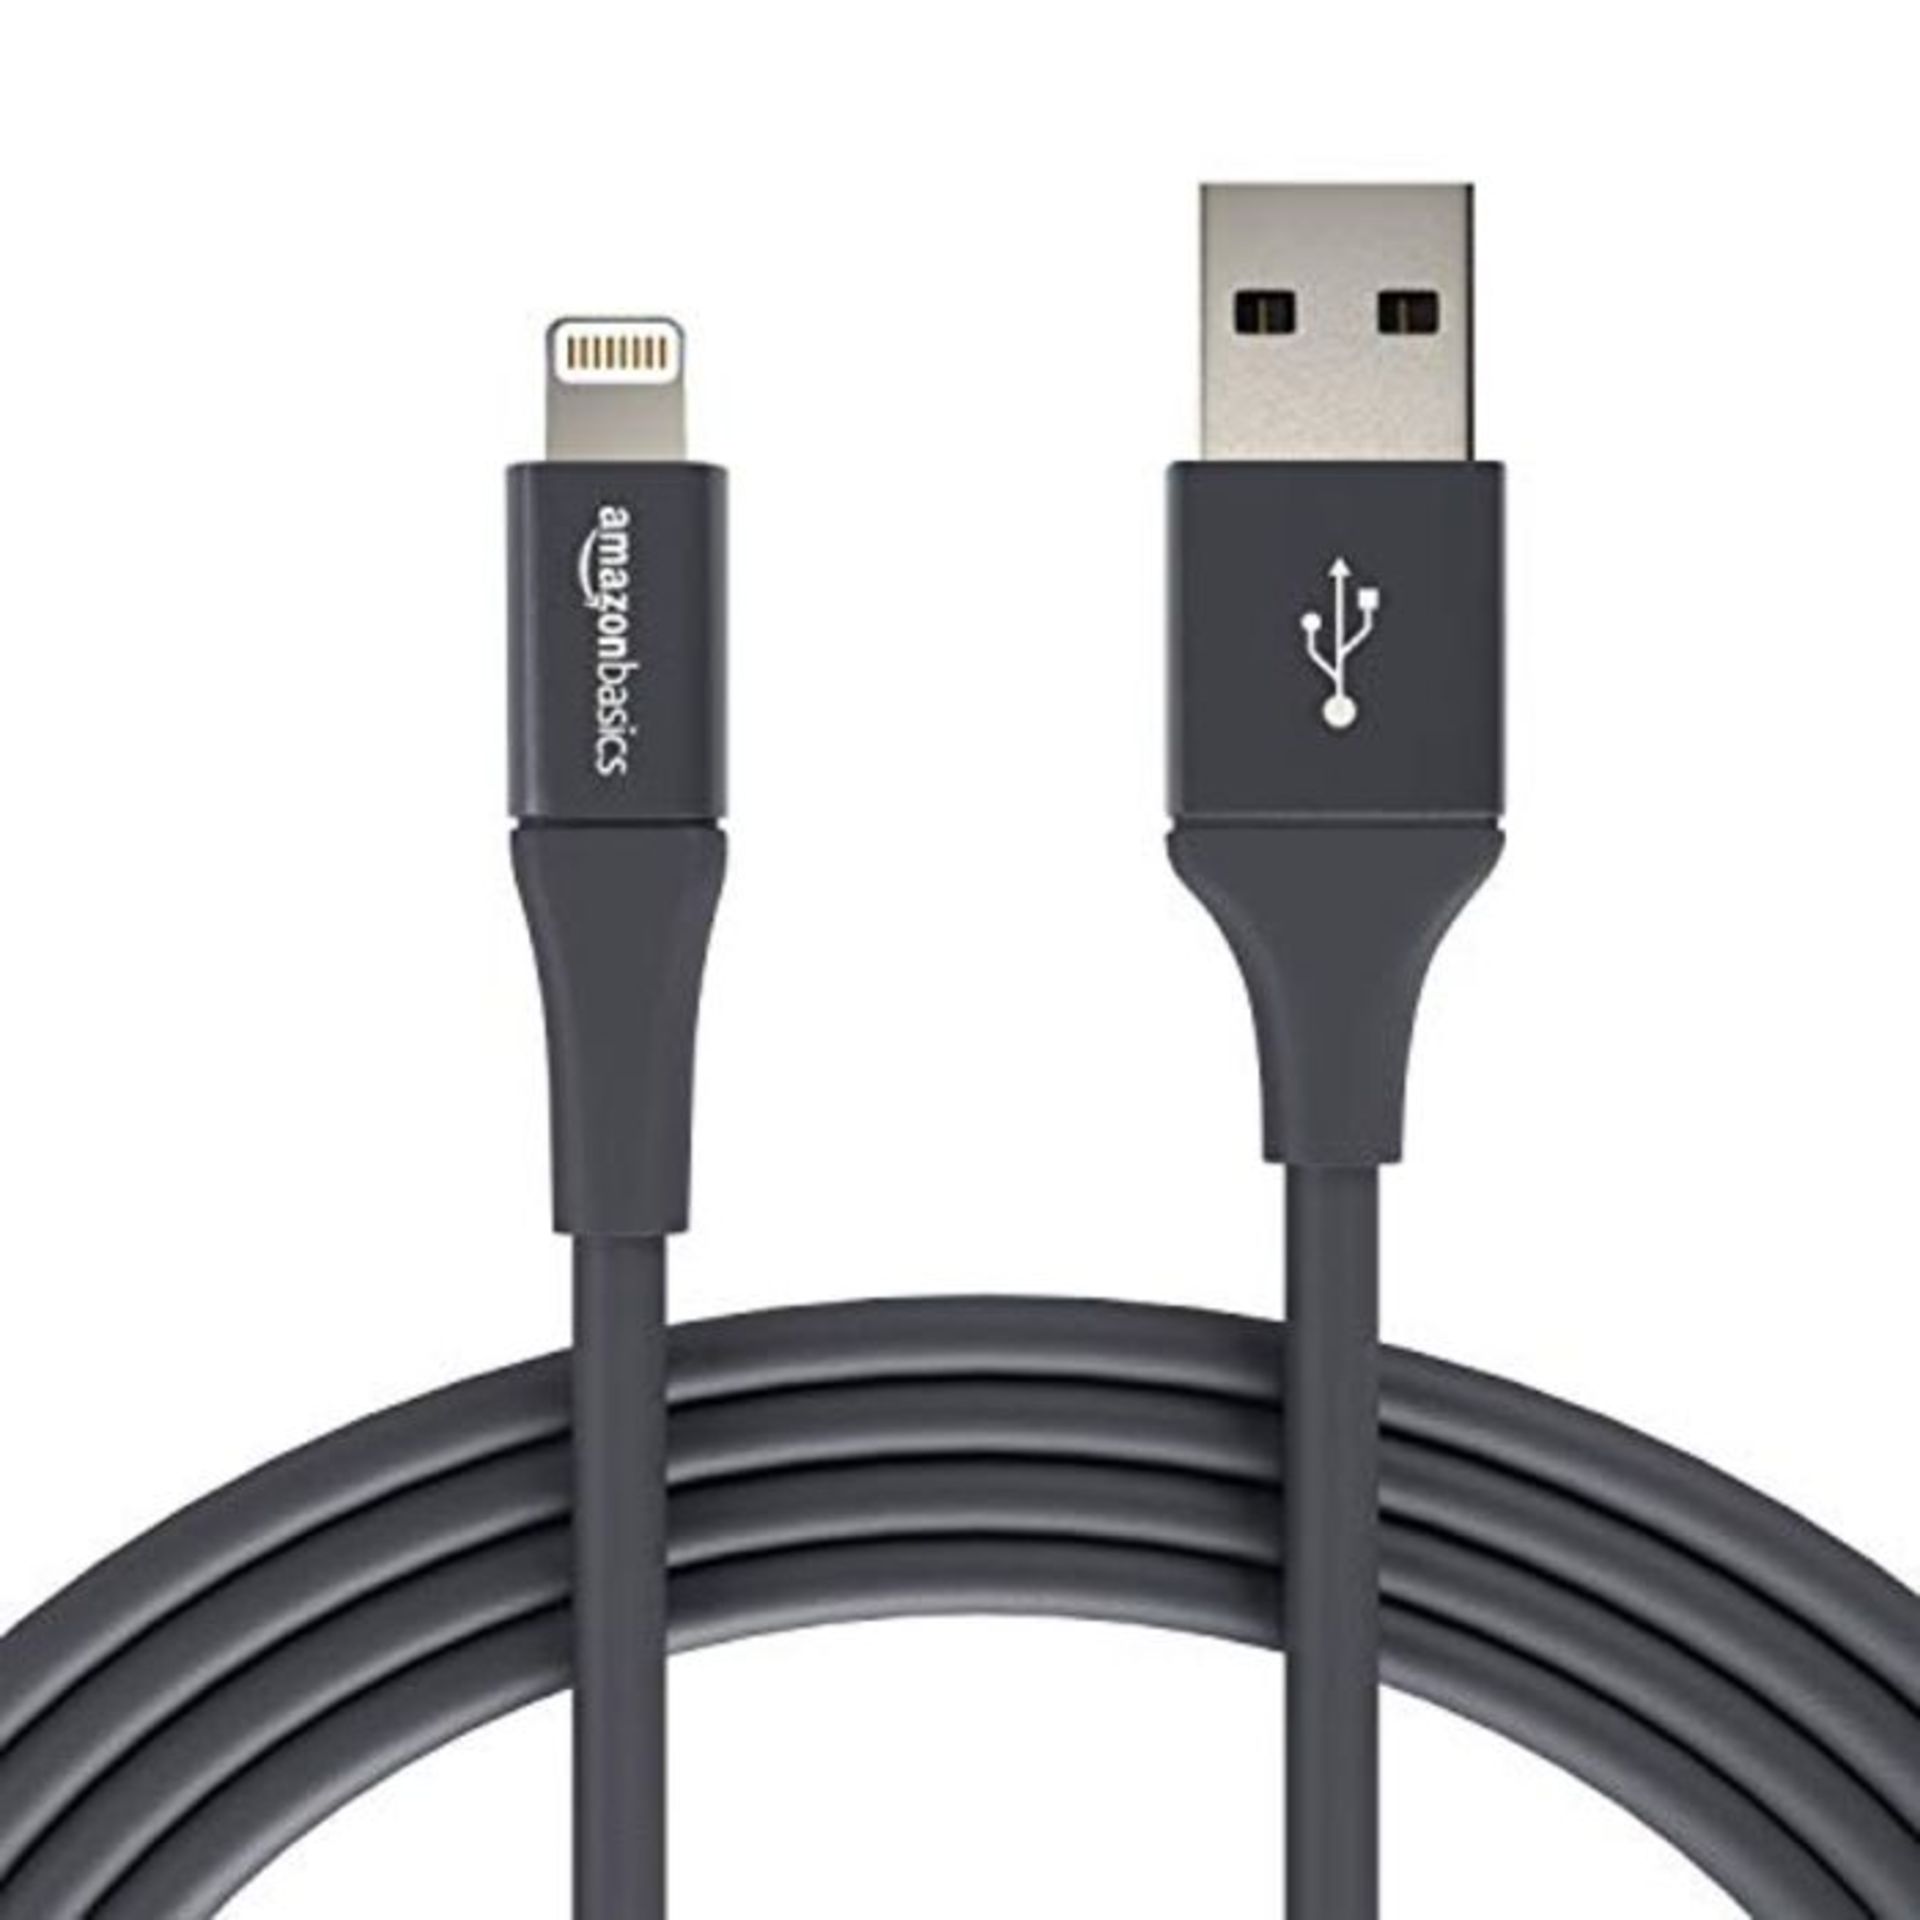 Amazon Basics USB A Cable with Lightning Connector, Premium Collection - 10 Feet (3 Me